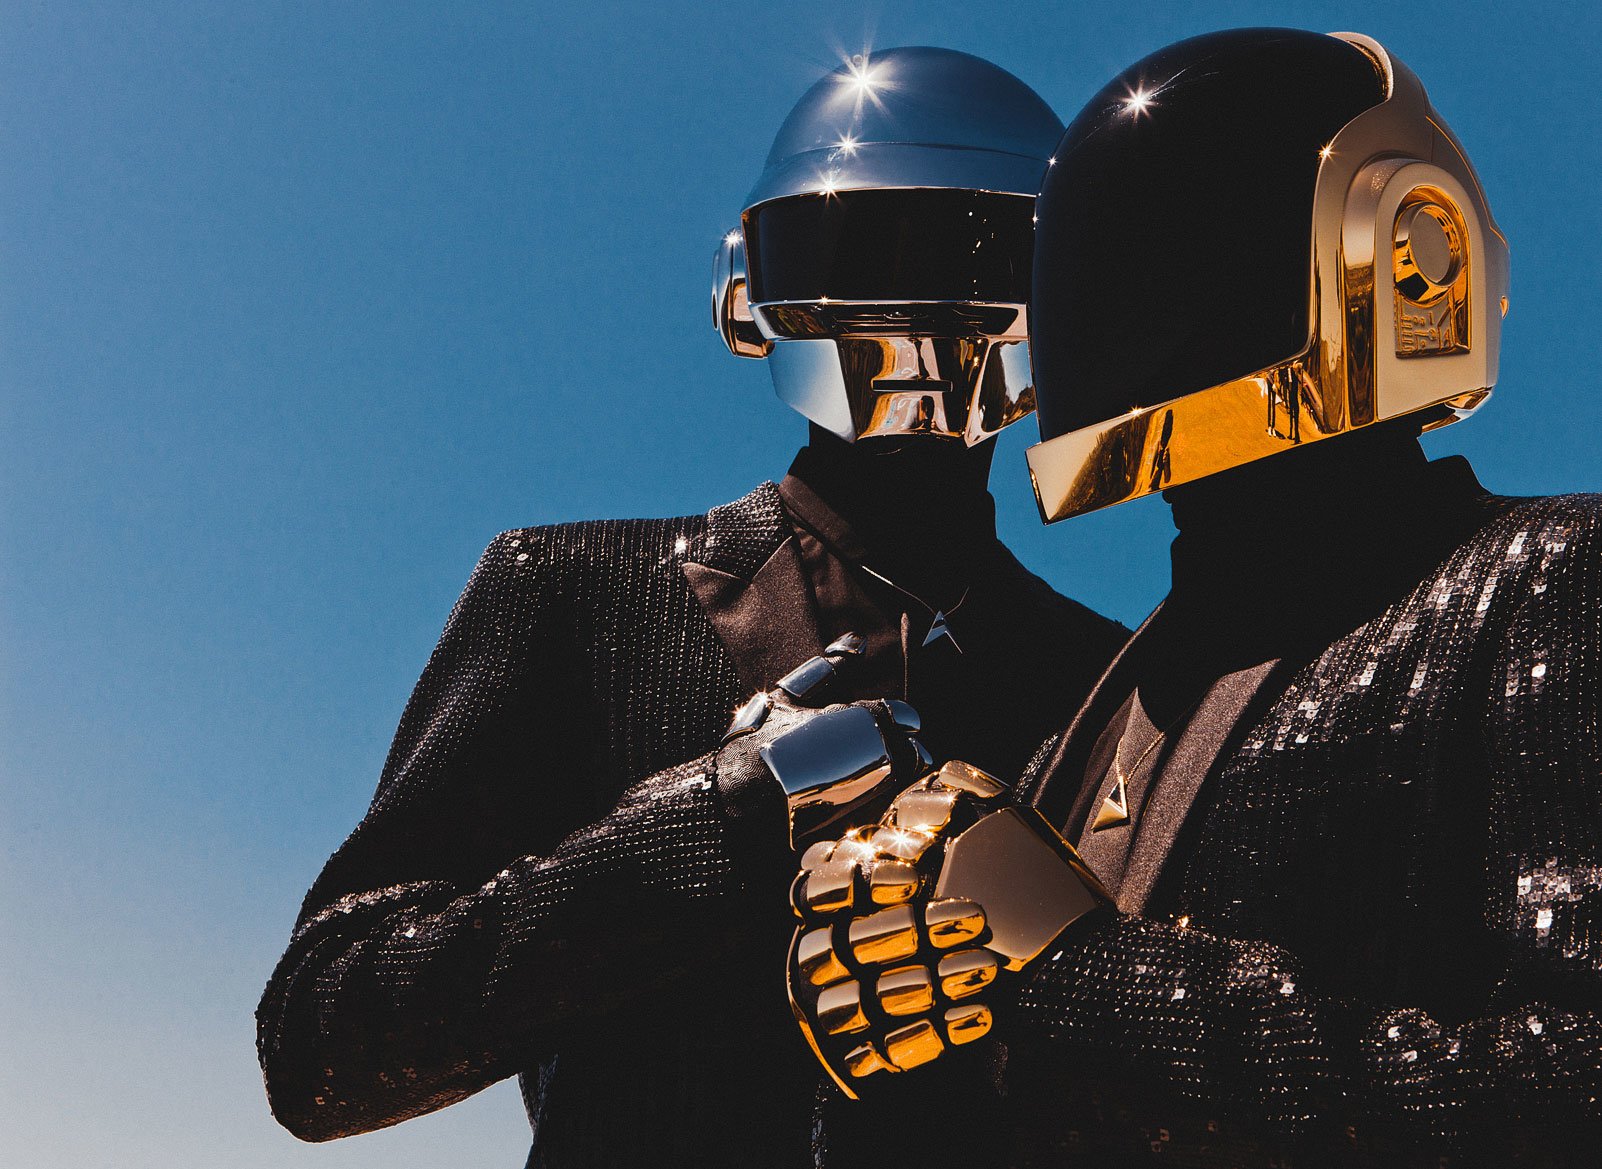 daft punk without helmets